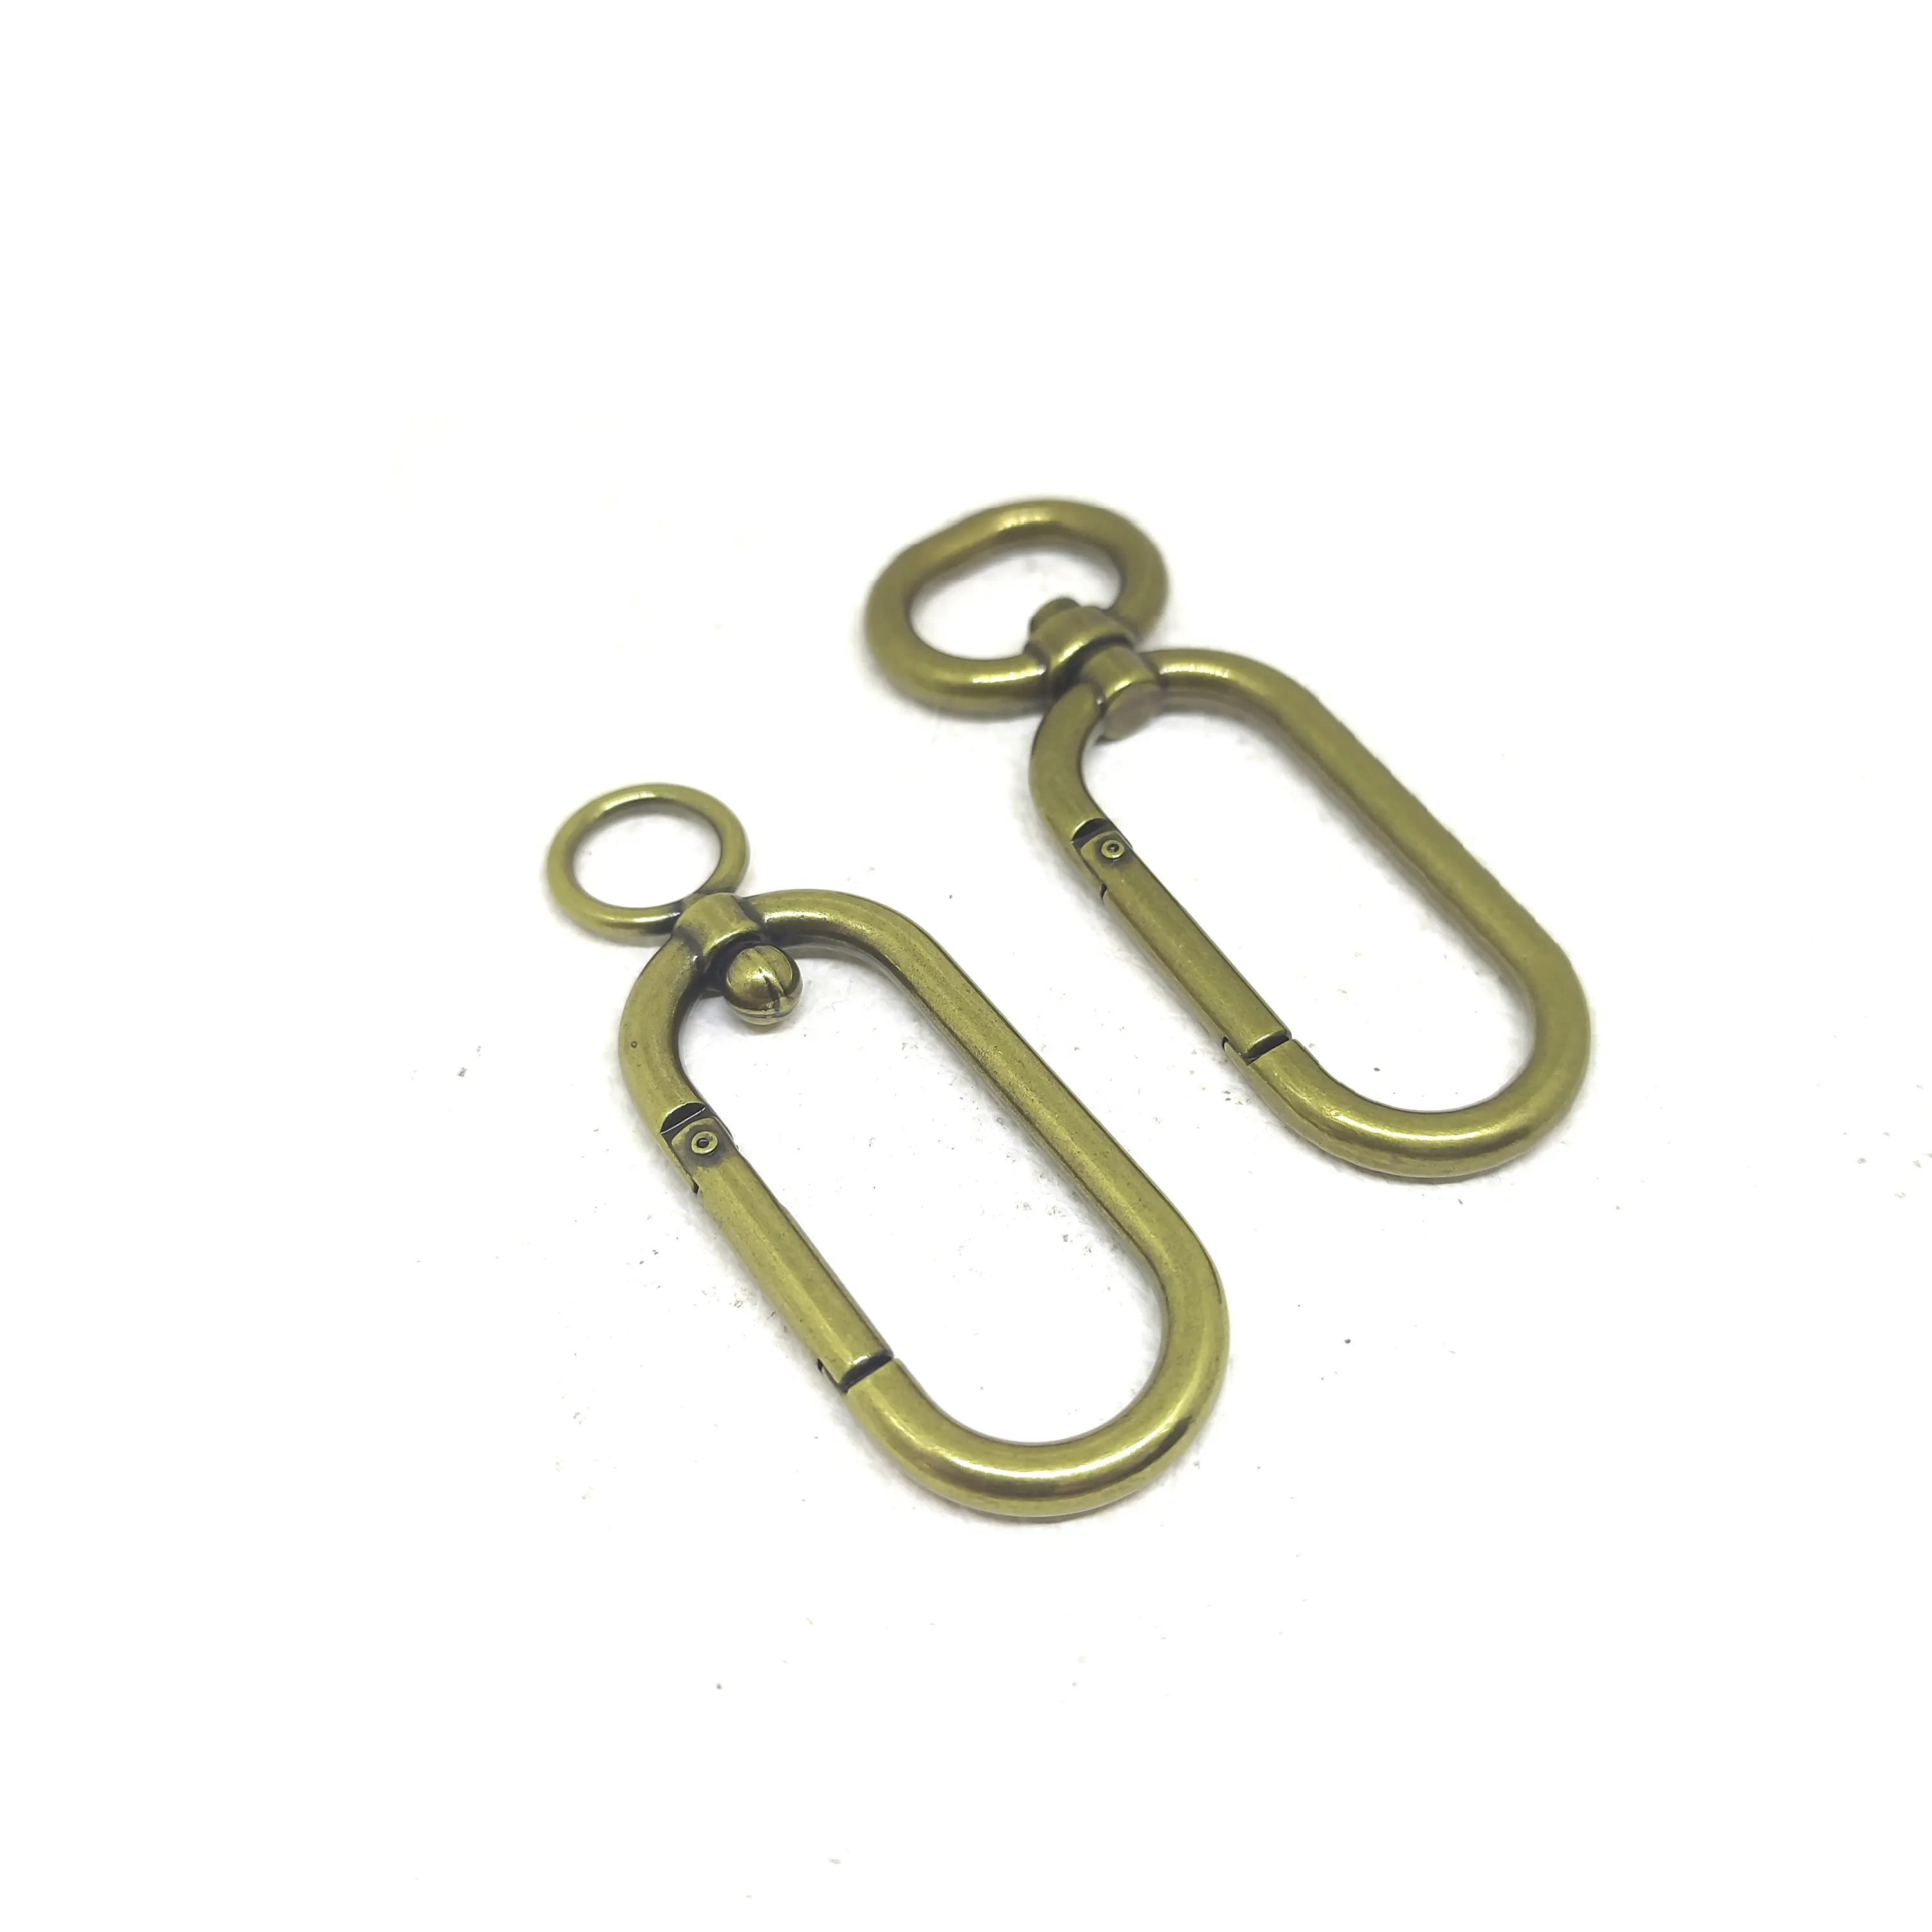 10mm and 16mm Antique OEB Gold Color Tone Buckle Handbag Bag Metal Parts Accessories Clasp Snap Oval Dog Hook